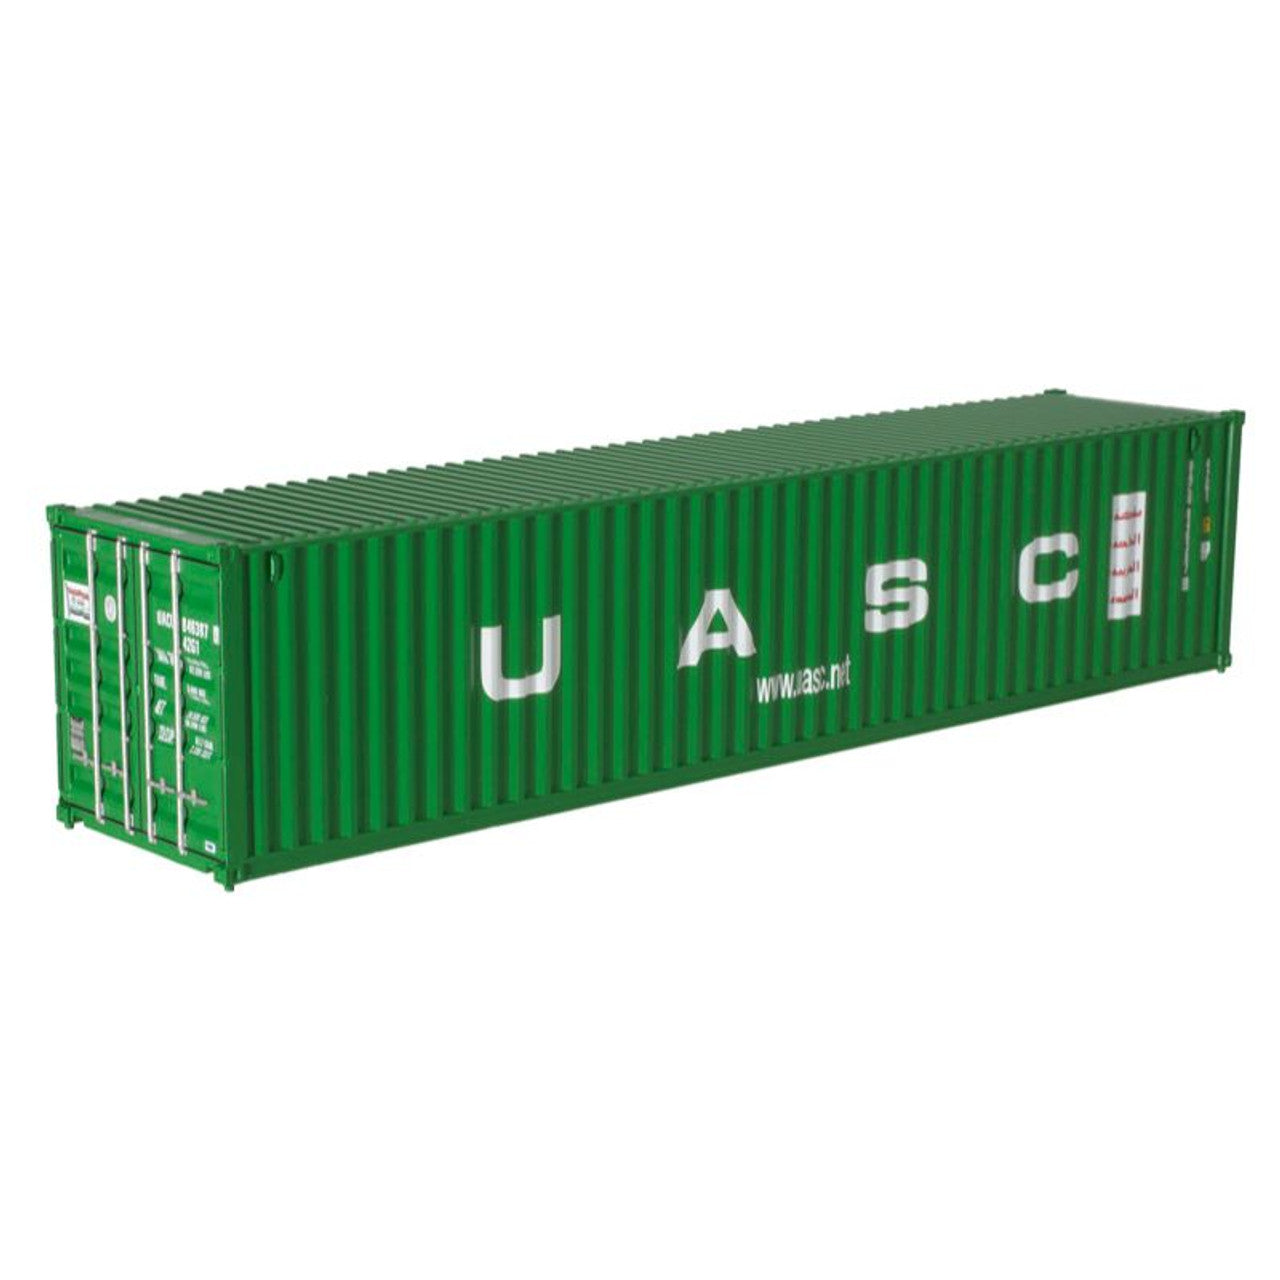 Atlas 20006548 HO Scale, 40' Container Set #2 (3 pack), United Arab Shipping